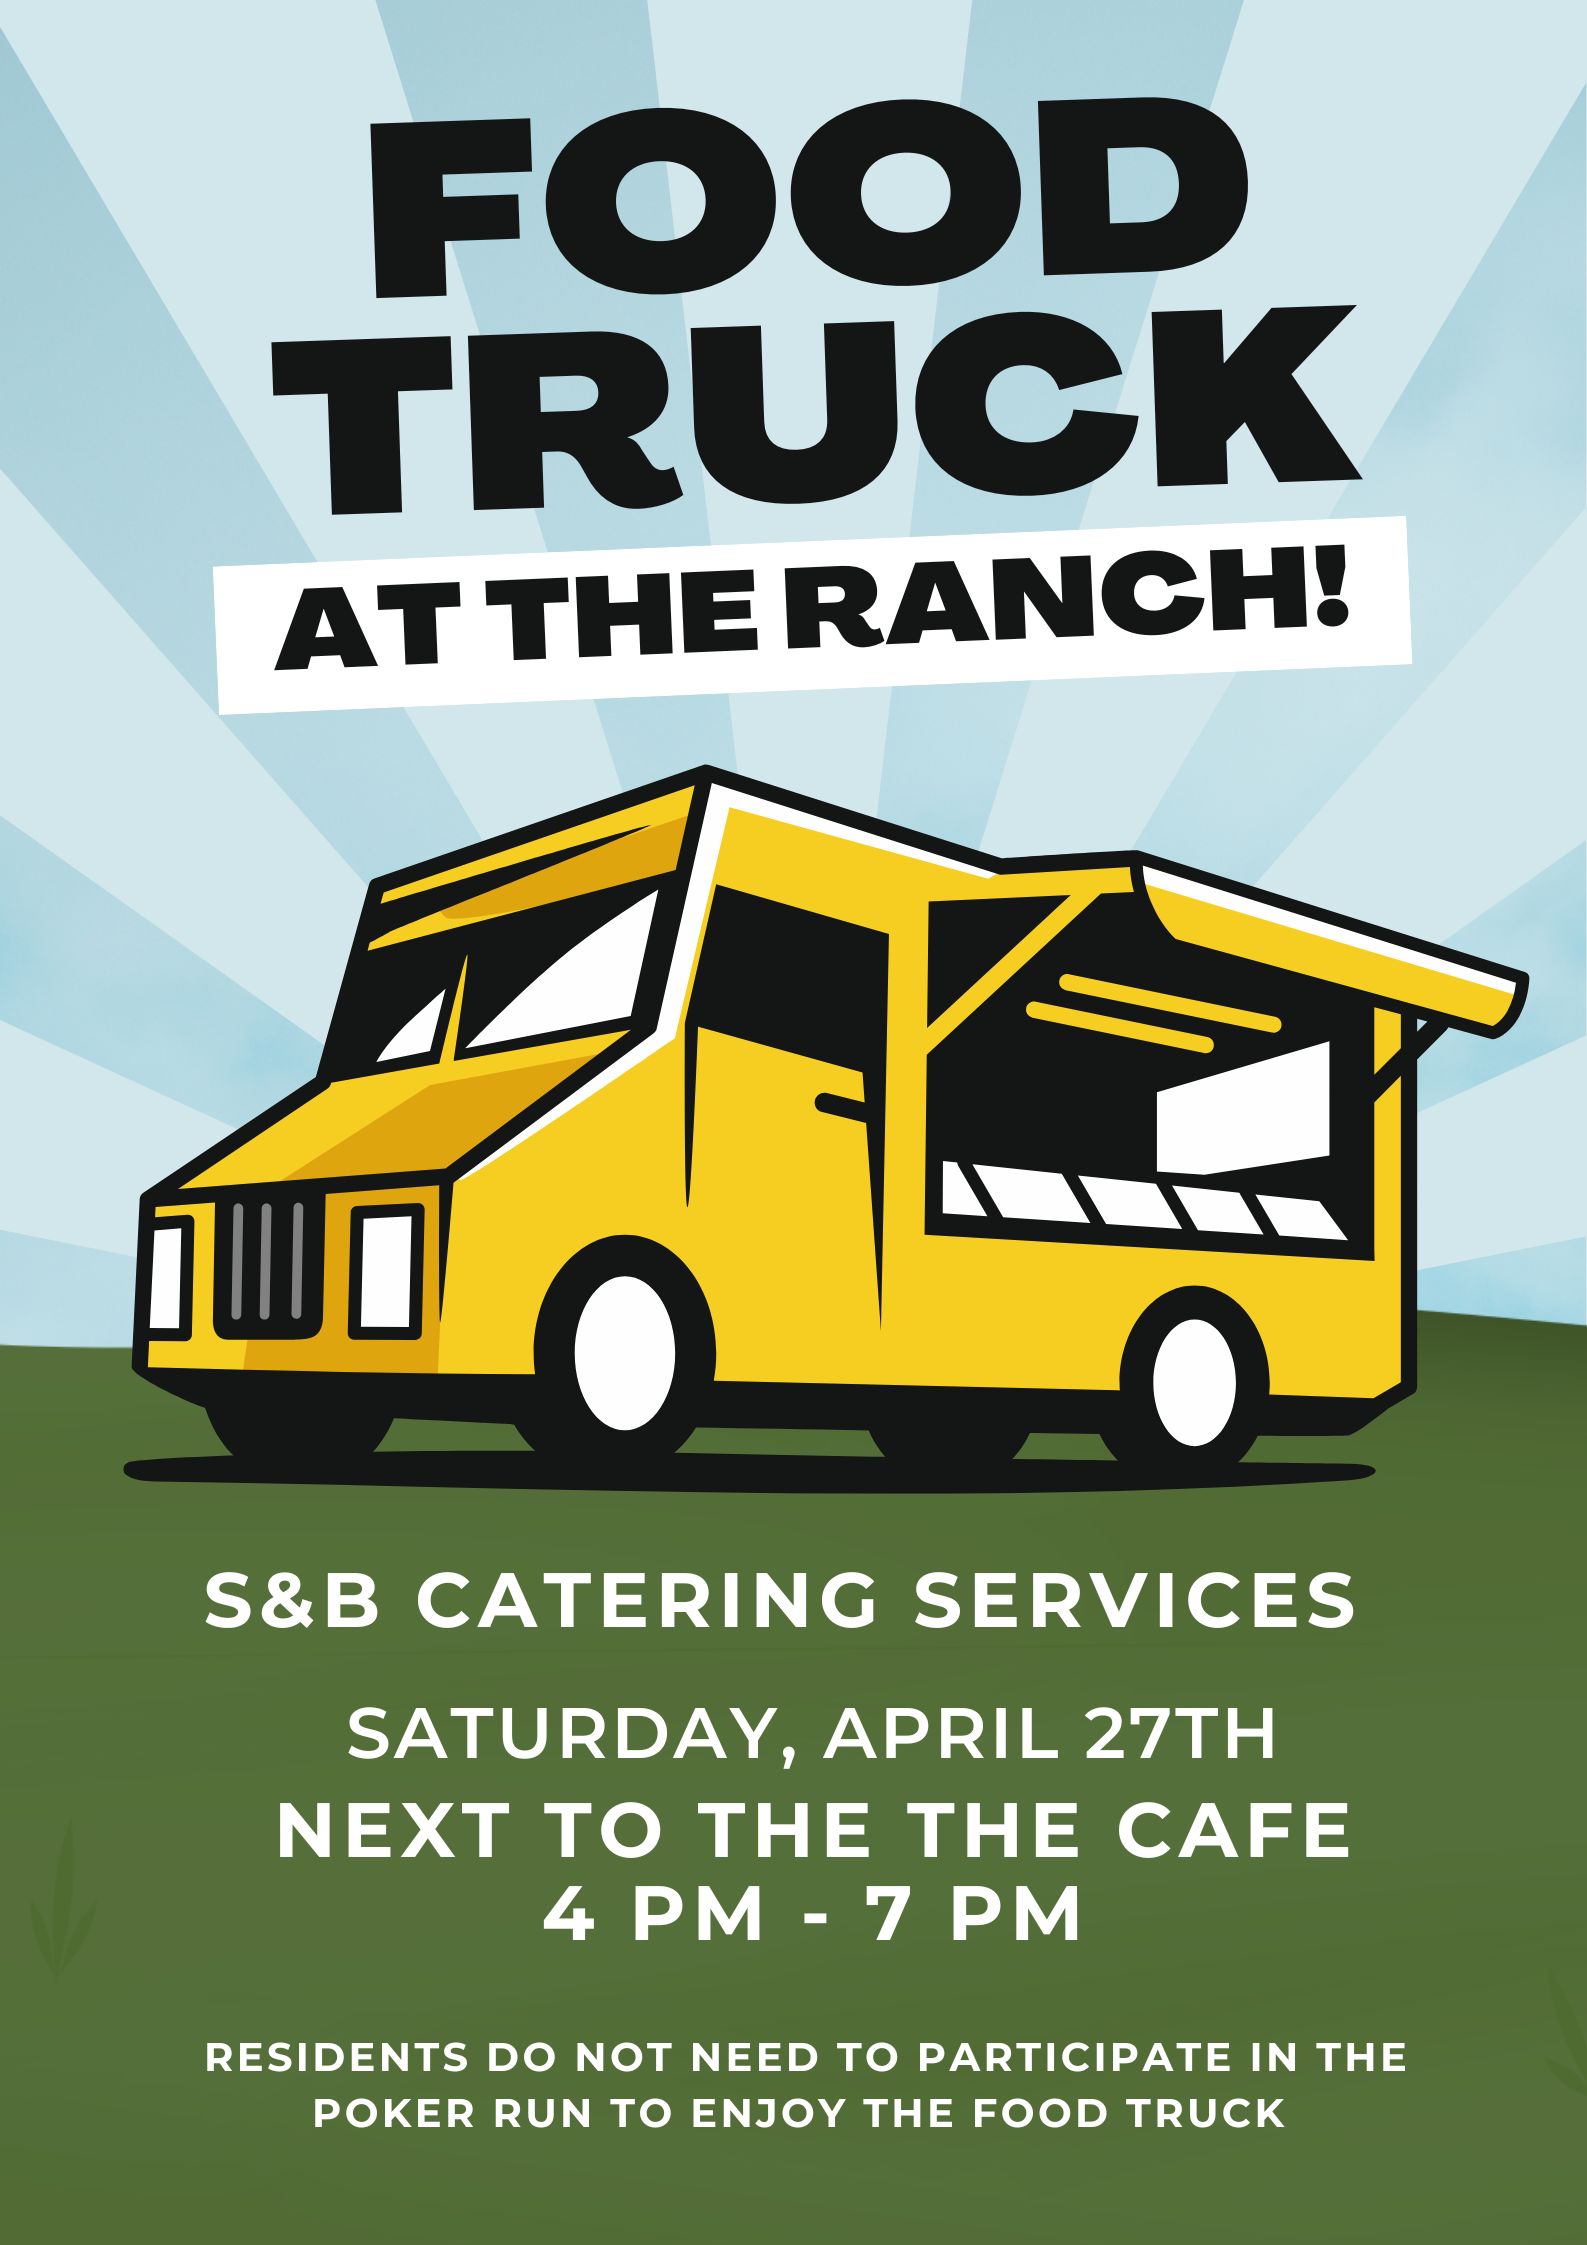 Food Truck at the Ranch!